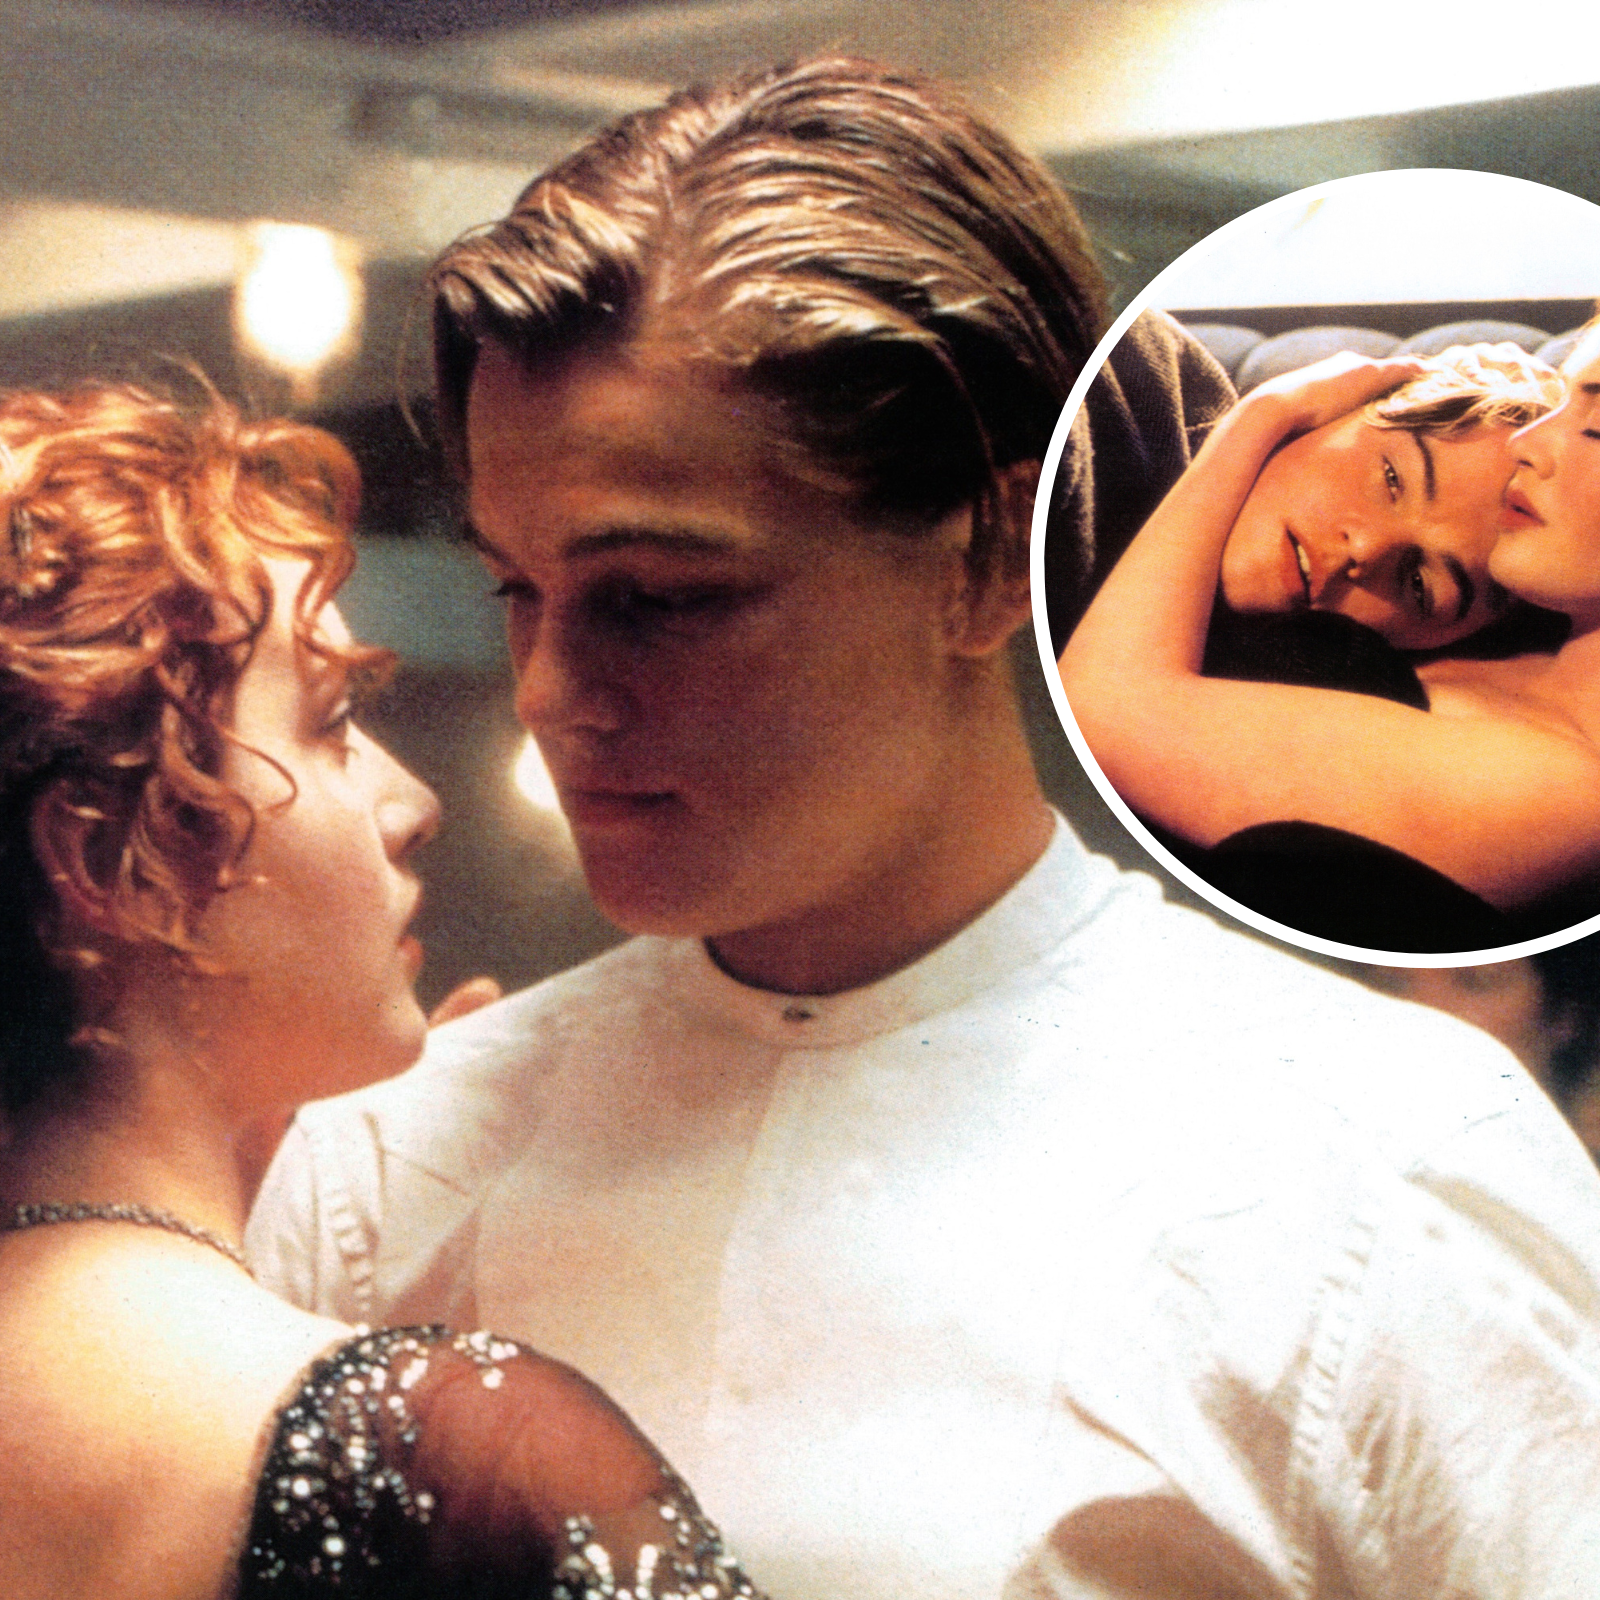 Kate Winslet's on 'Titanic' Puzzles Fans—'Stressing Out'